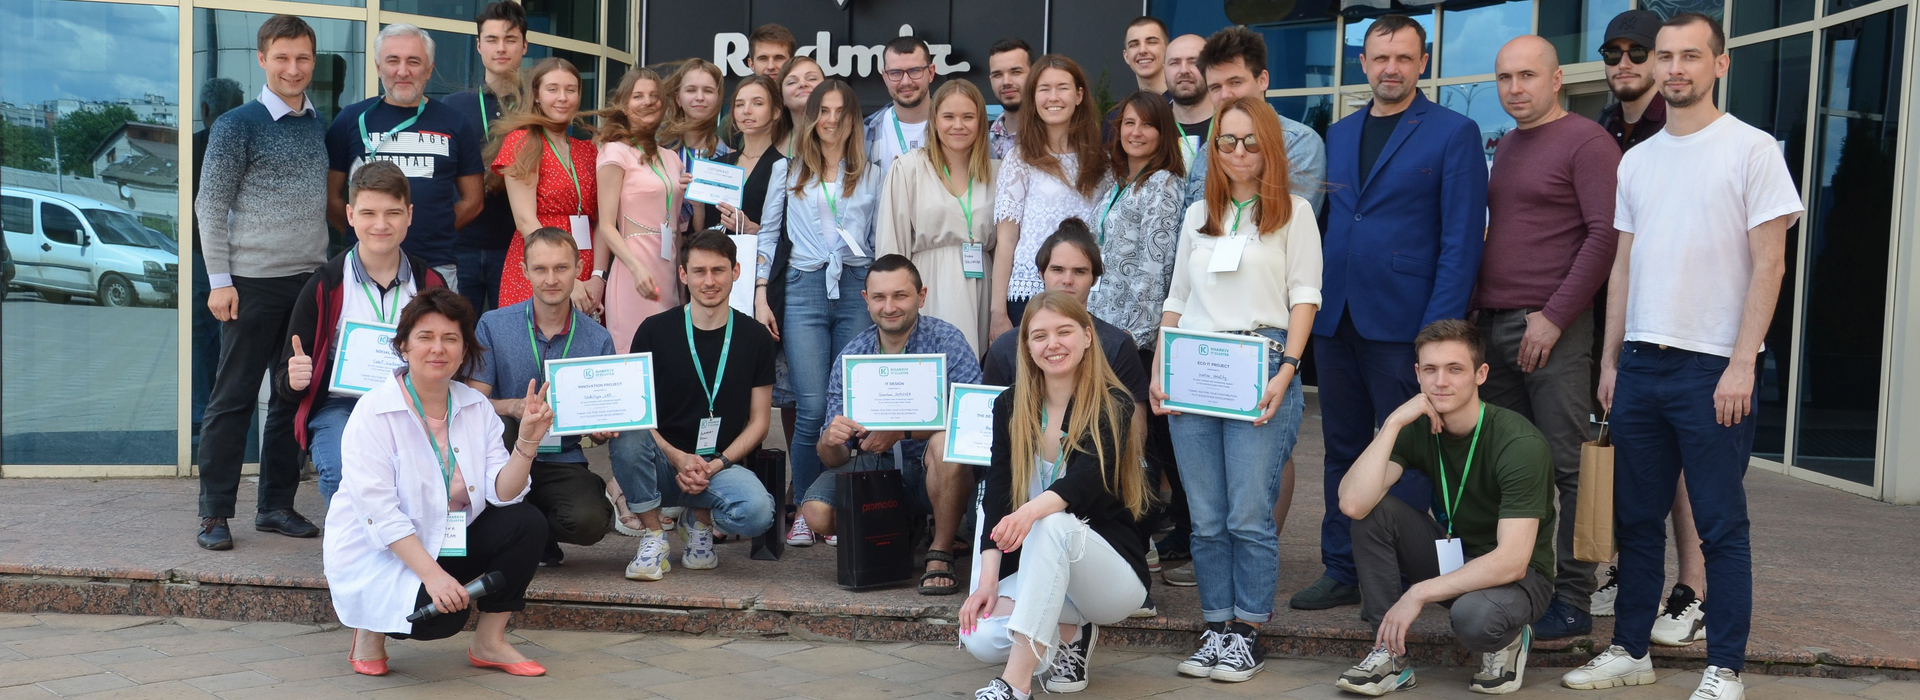 Intellias Supported the Development of the VeloCity Application as Part of the Student IT Boot Camp from Kharkiv IT Cluster